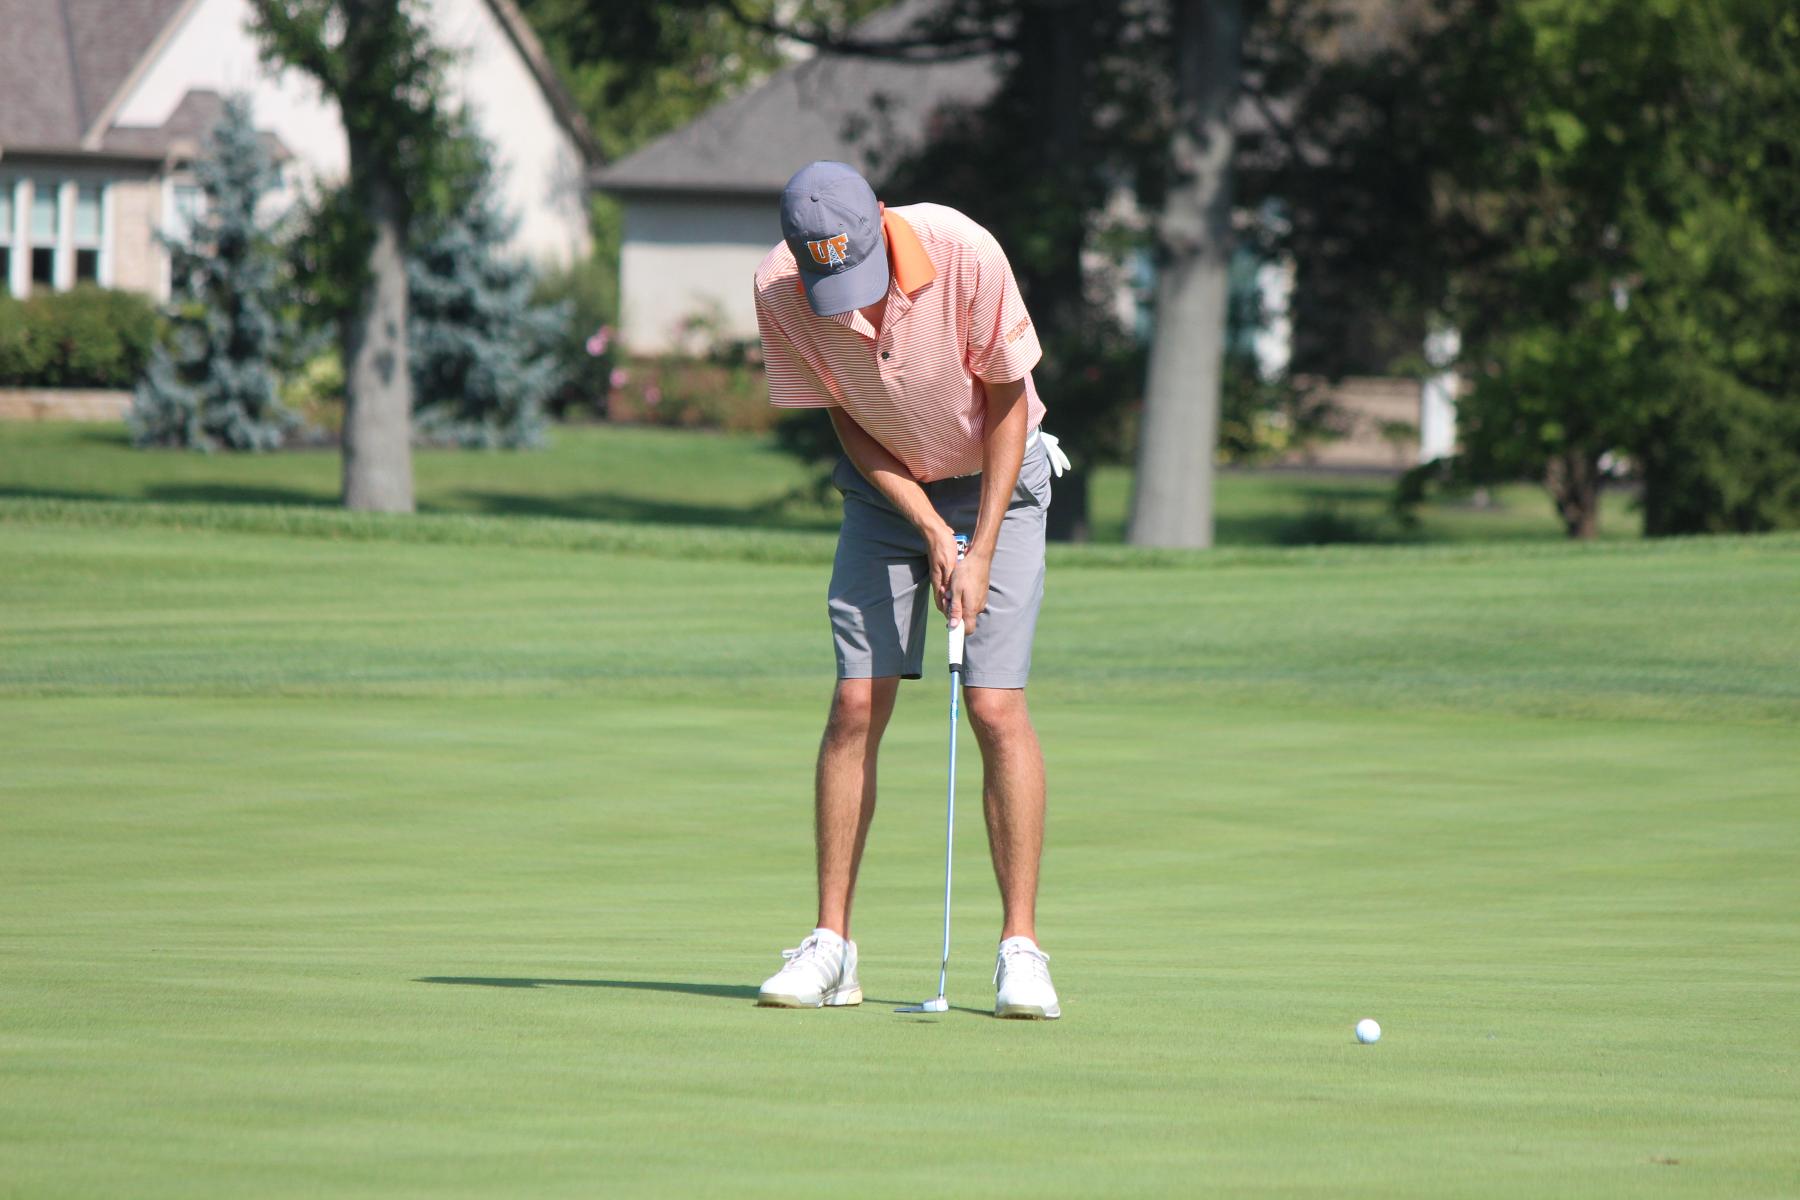 Oilers in 5th at Trevecca